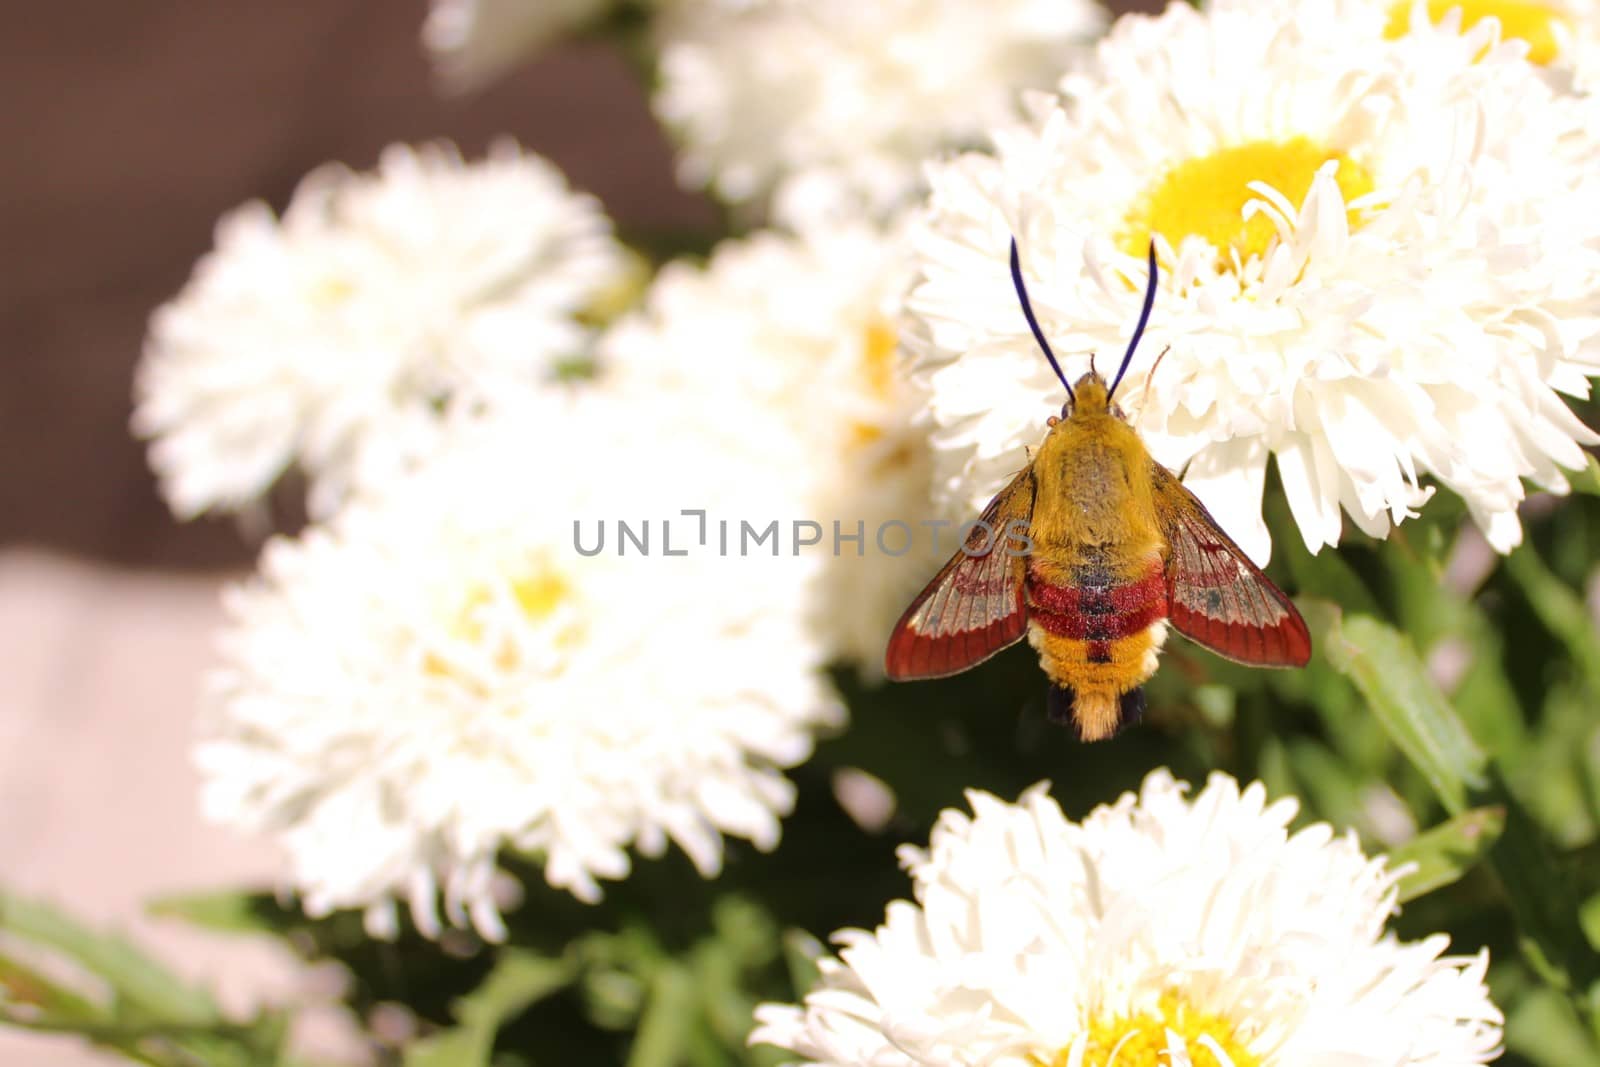 The picture shows a hummingbird hawk moth on a flower.